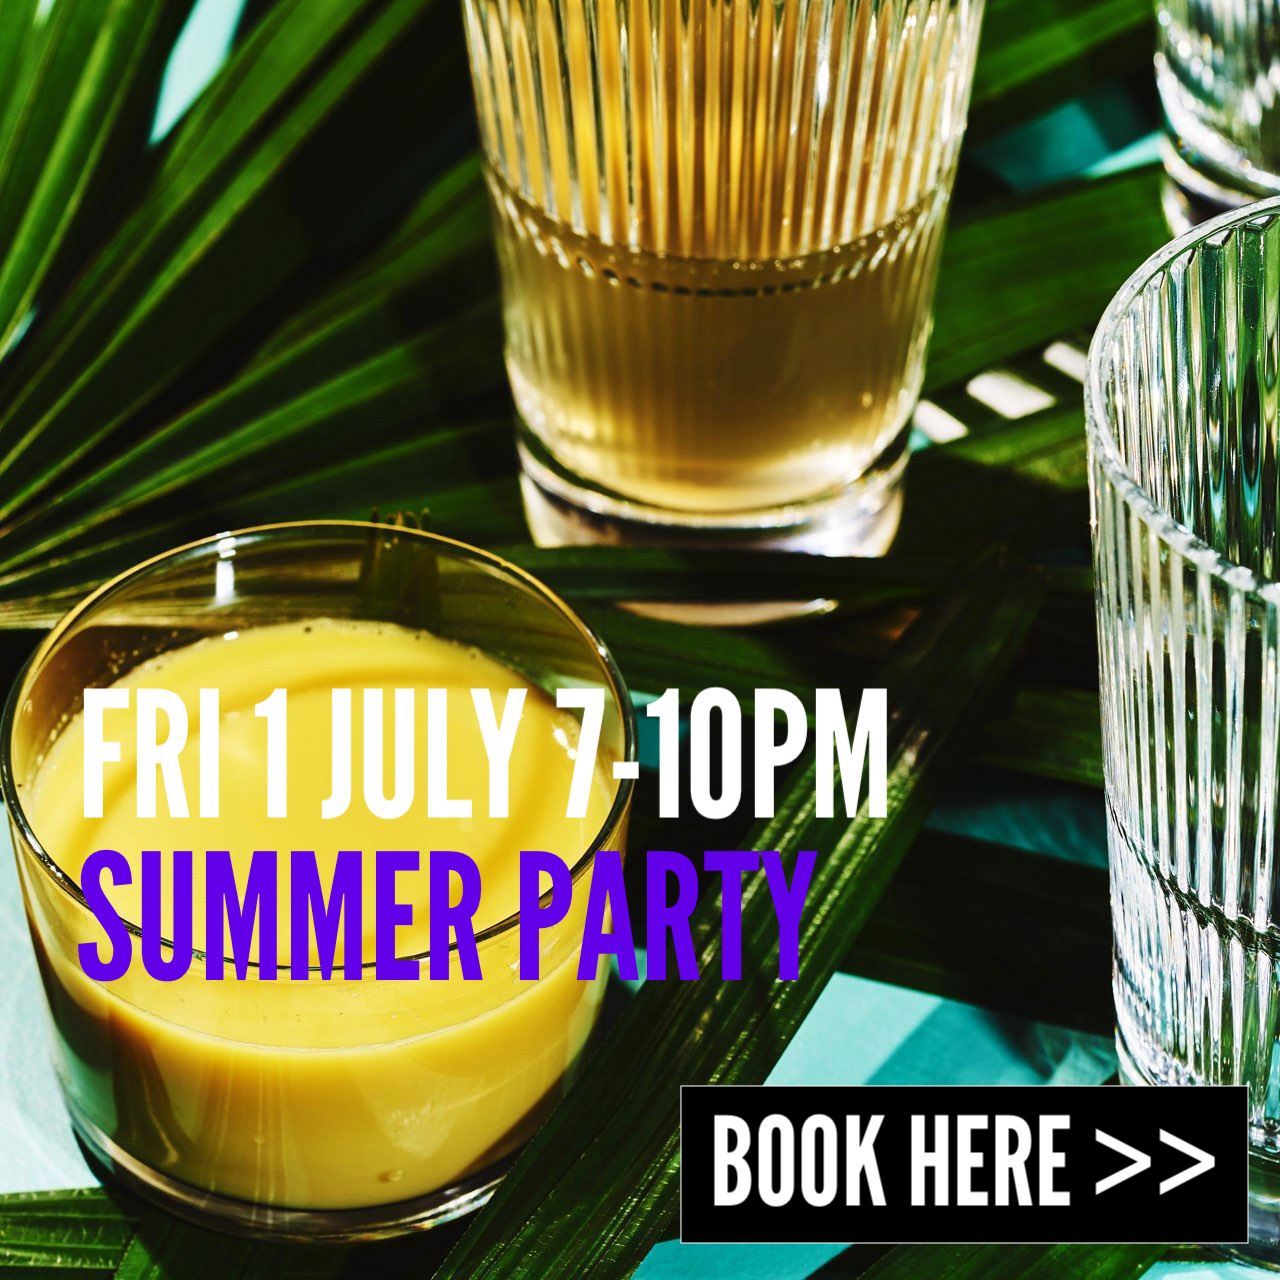 Friday 1 July Summer Party